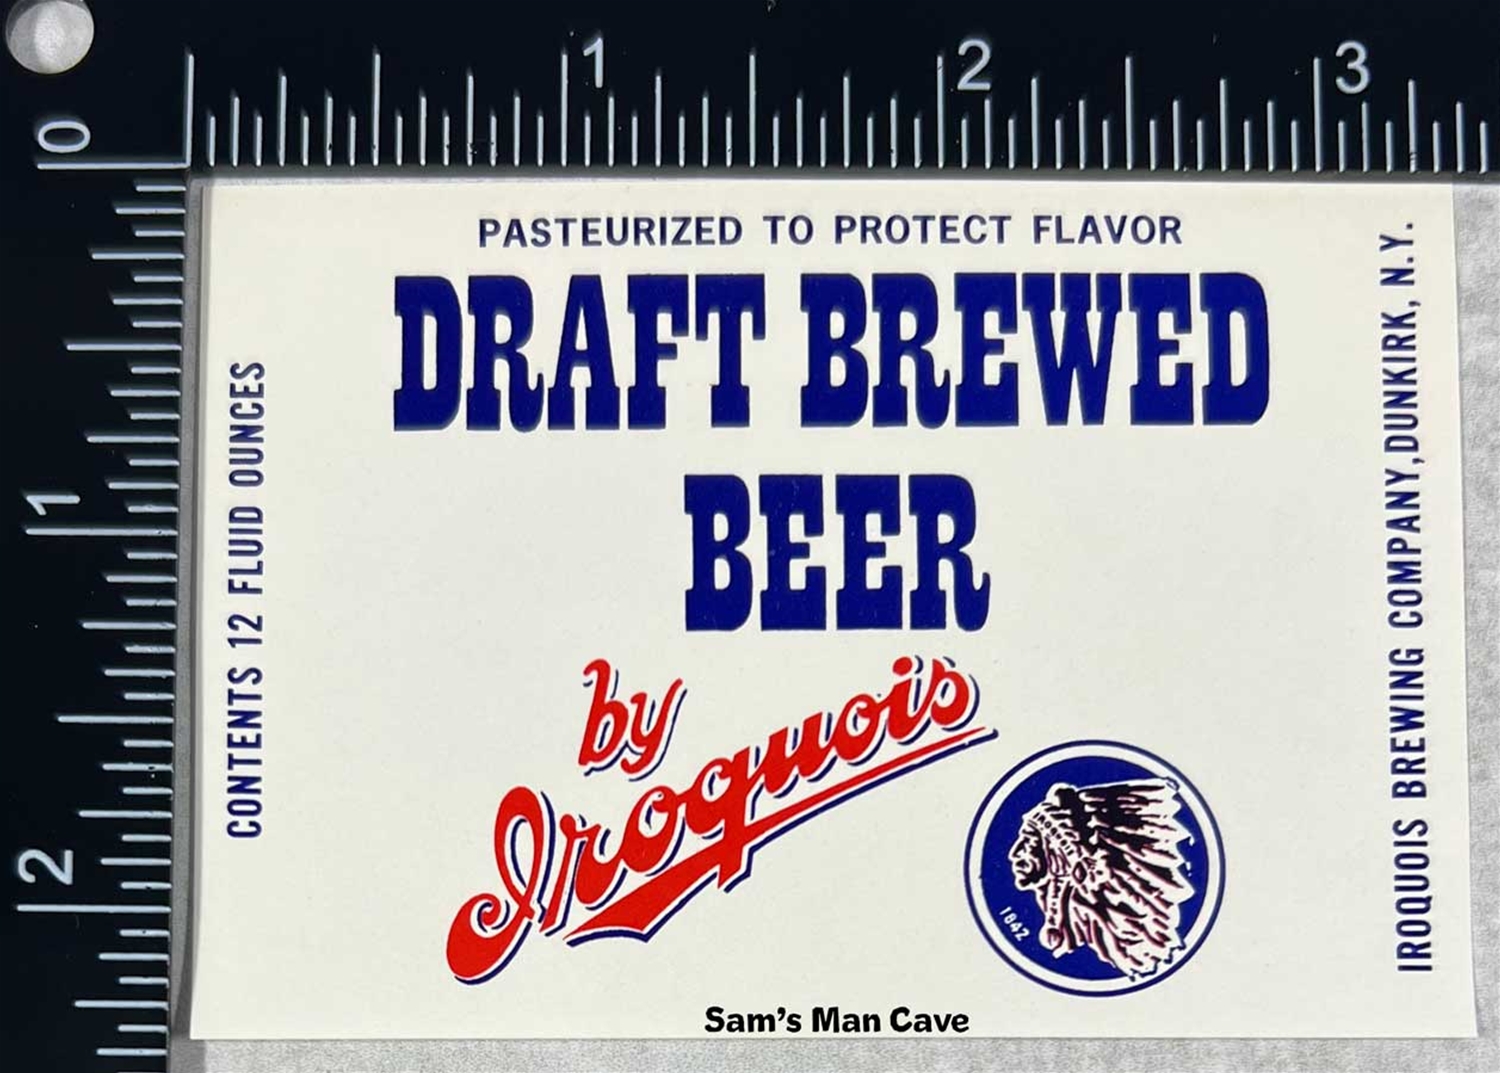 Iroquois Draft Brewed Beer Label